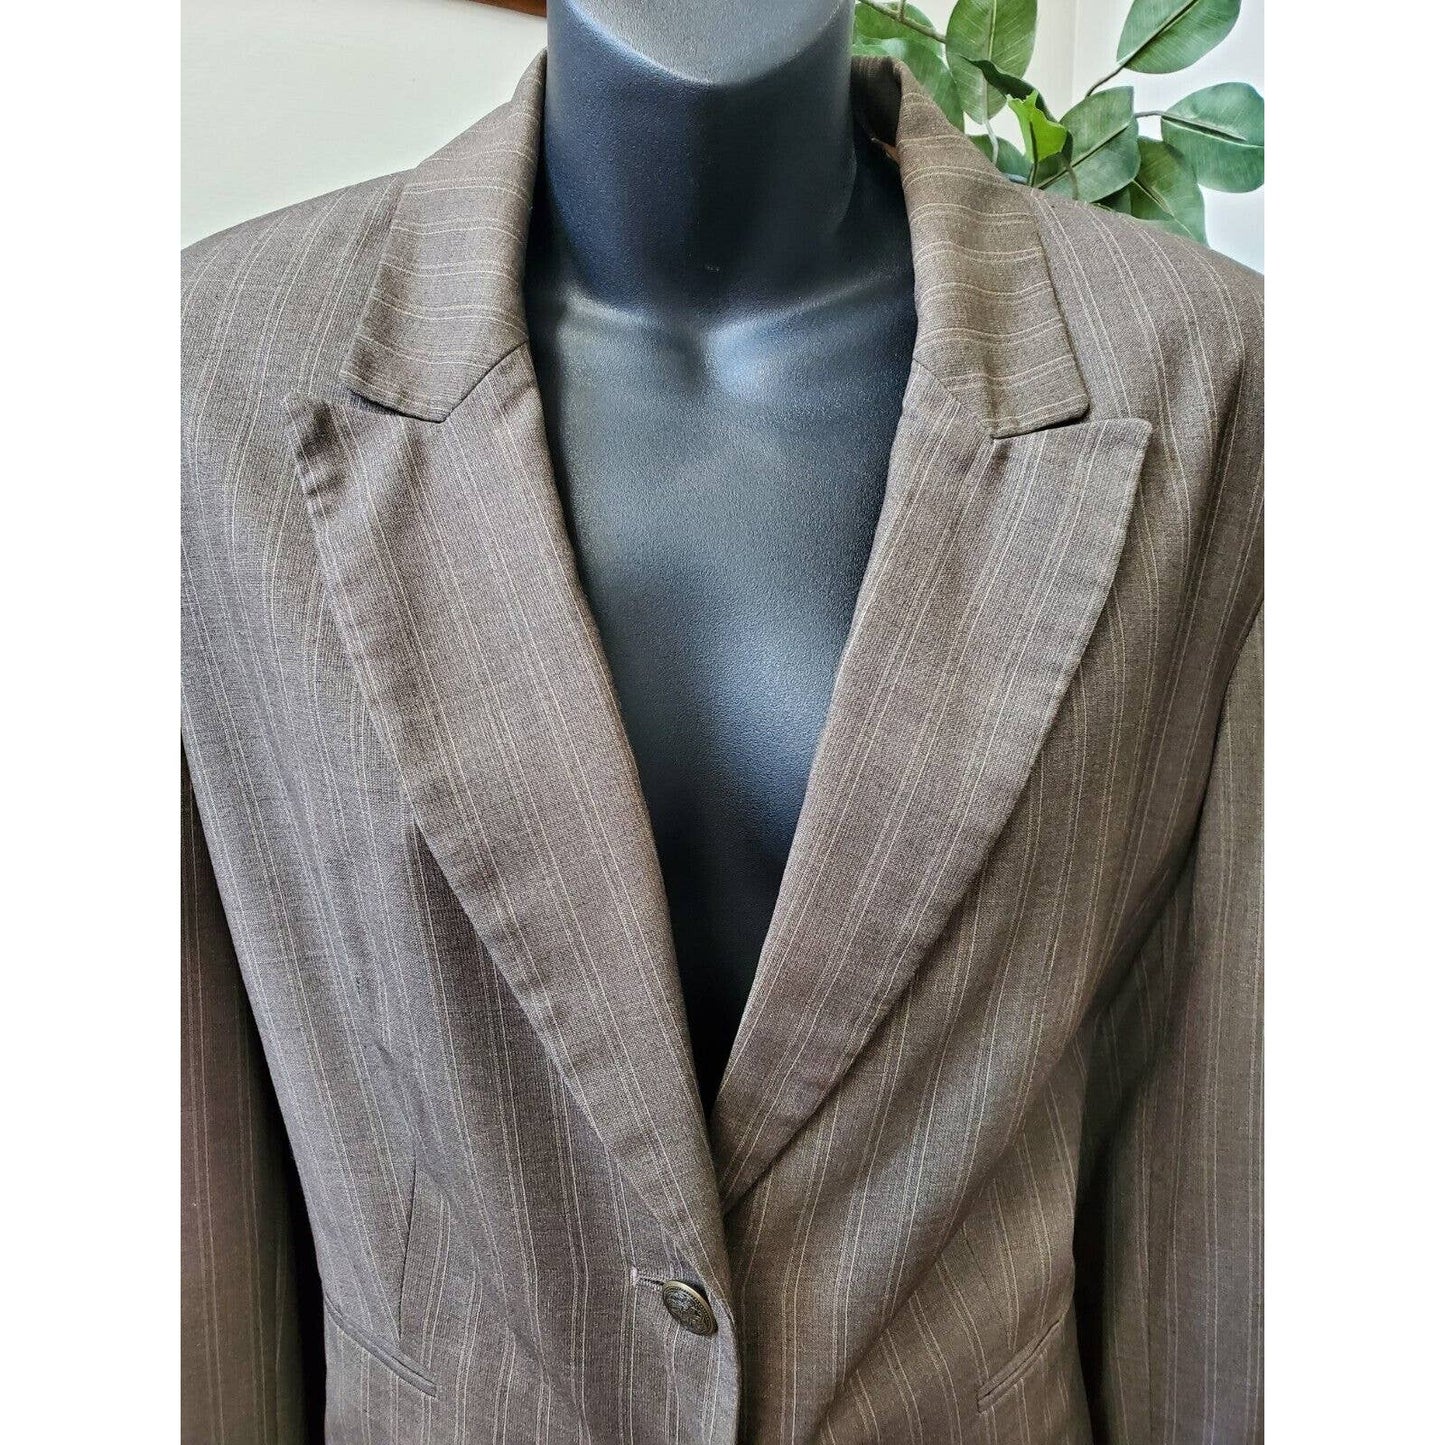 Dressbarn Women's Brown Polyester Single Breasted Blazer & Pant 2 Piece Suit 16